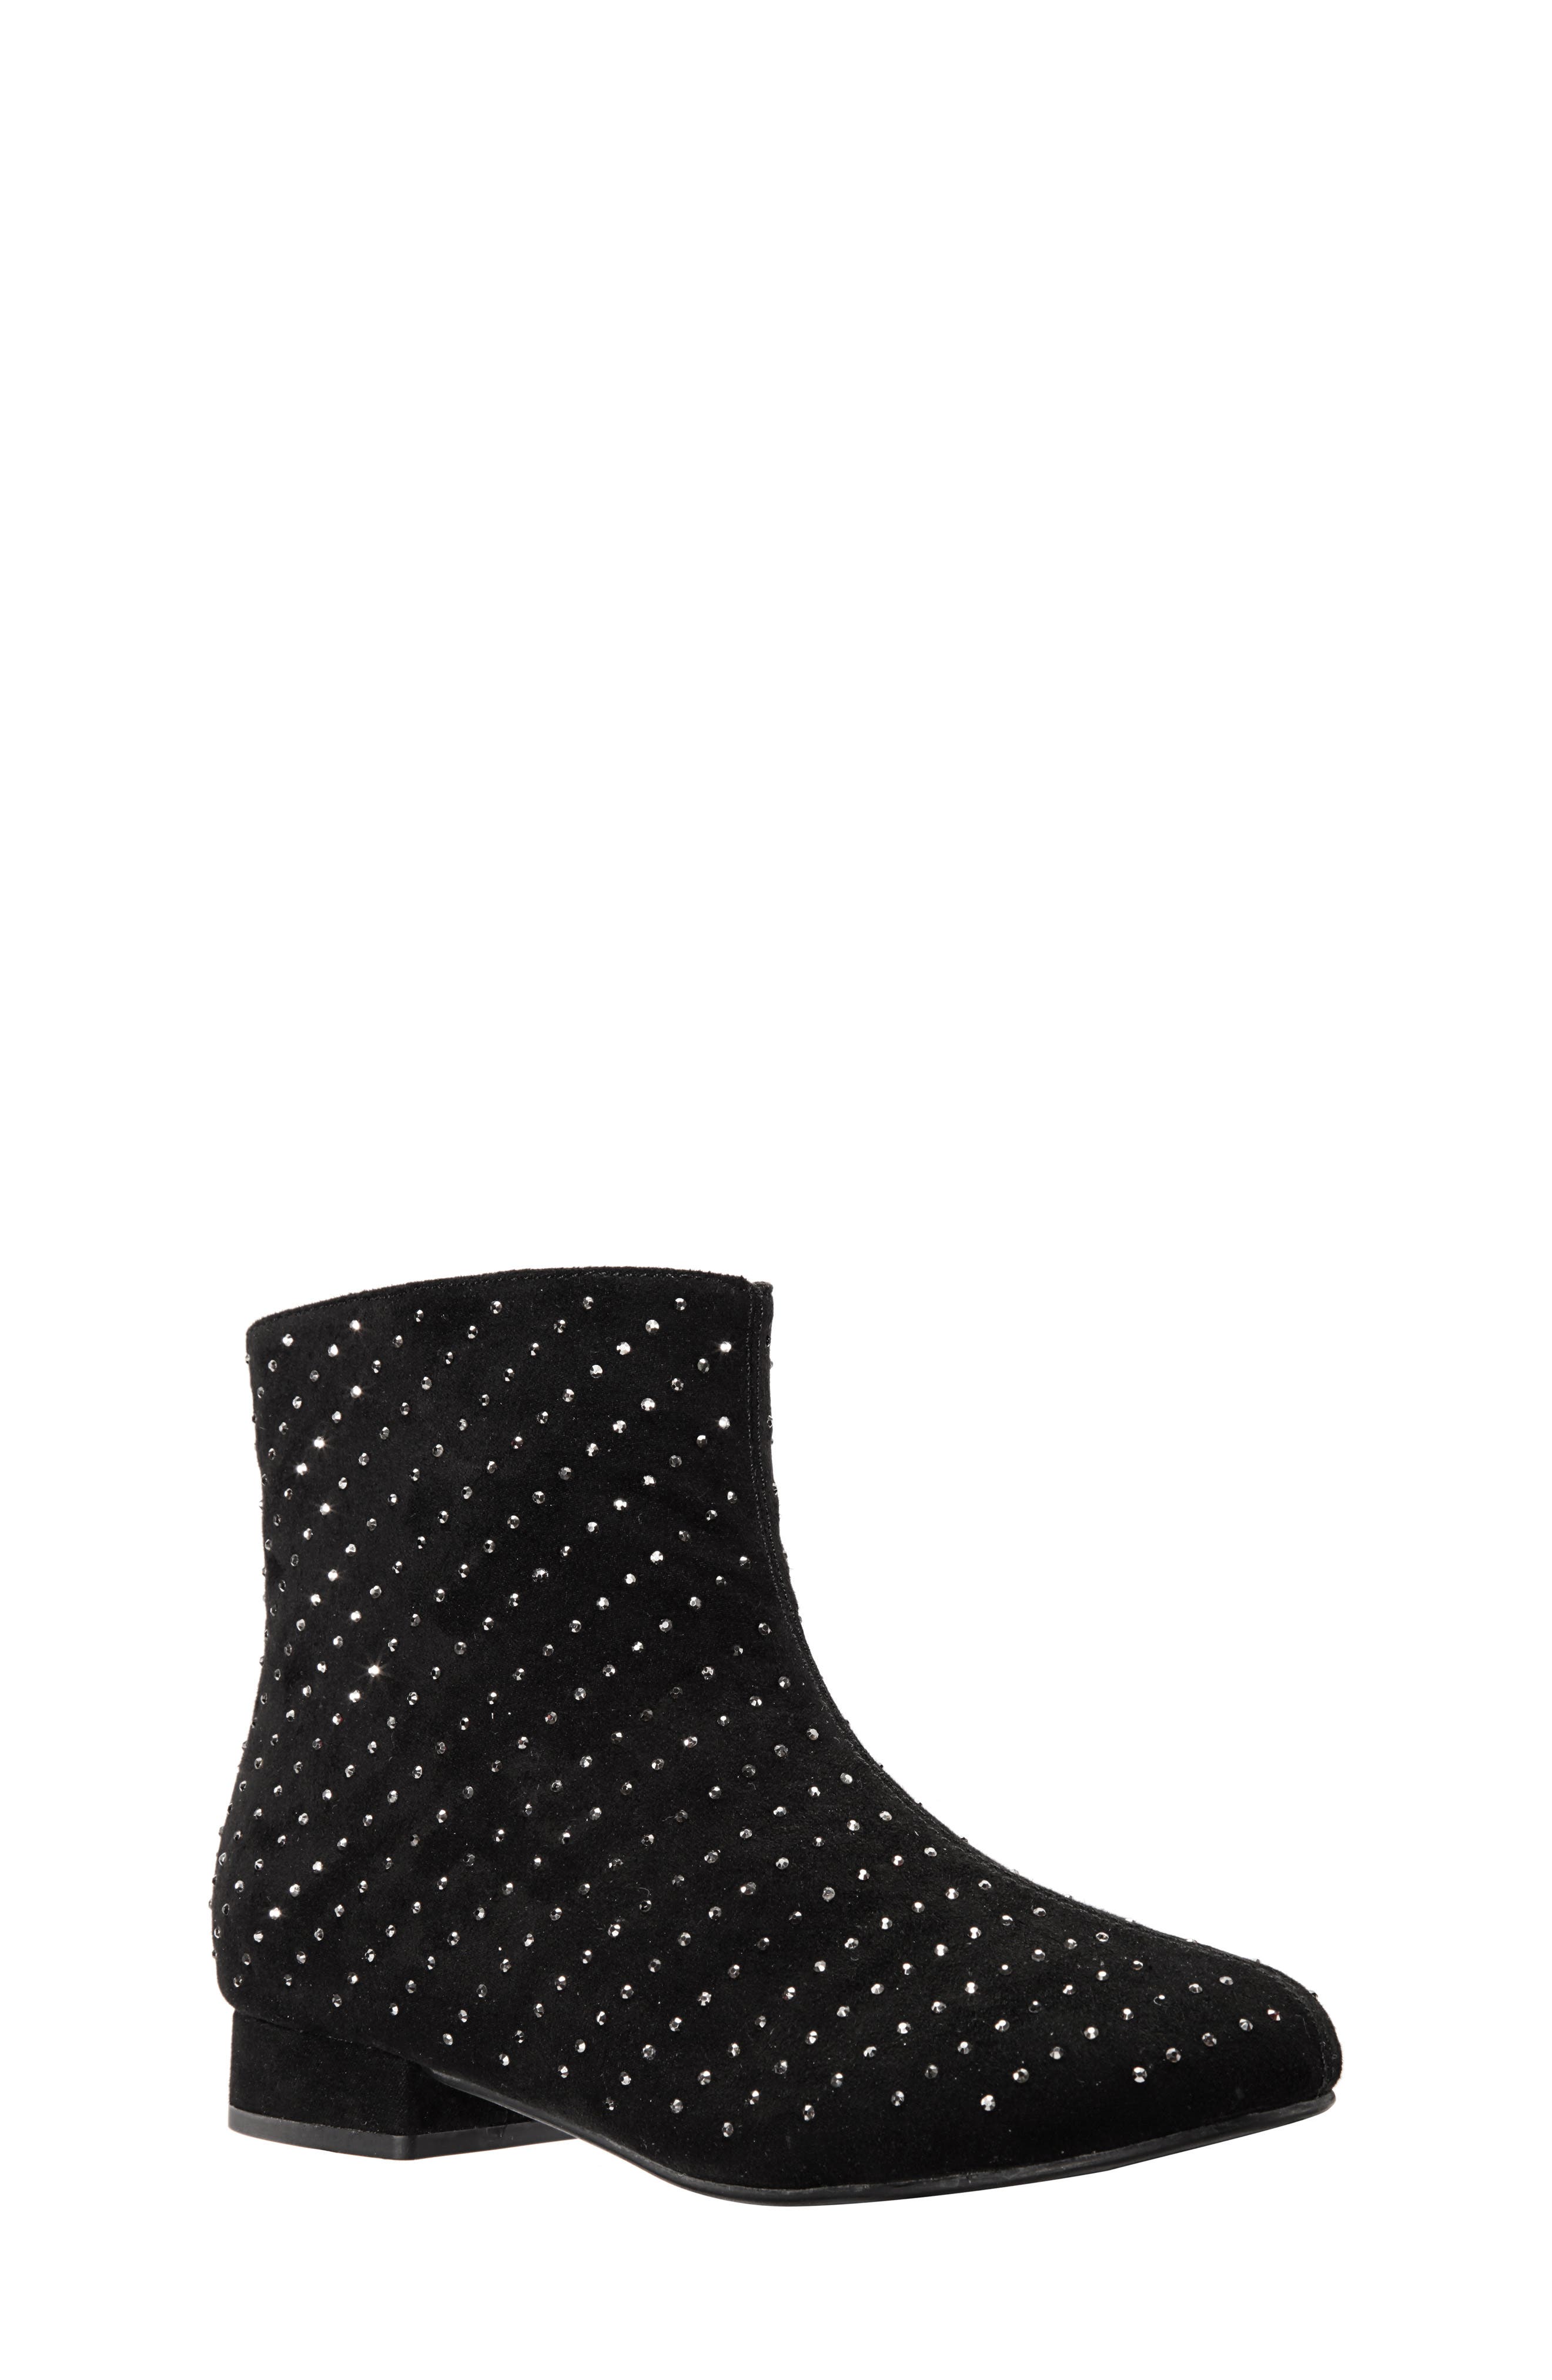 UPC 794378374688 product image for Toddler Girl's Nina Peaches Studded Bootie, Size 11 M - Black | upcitemdb.com